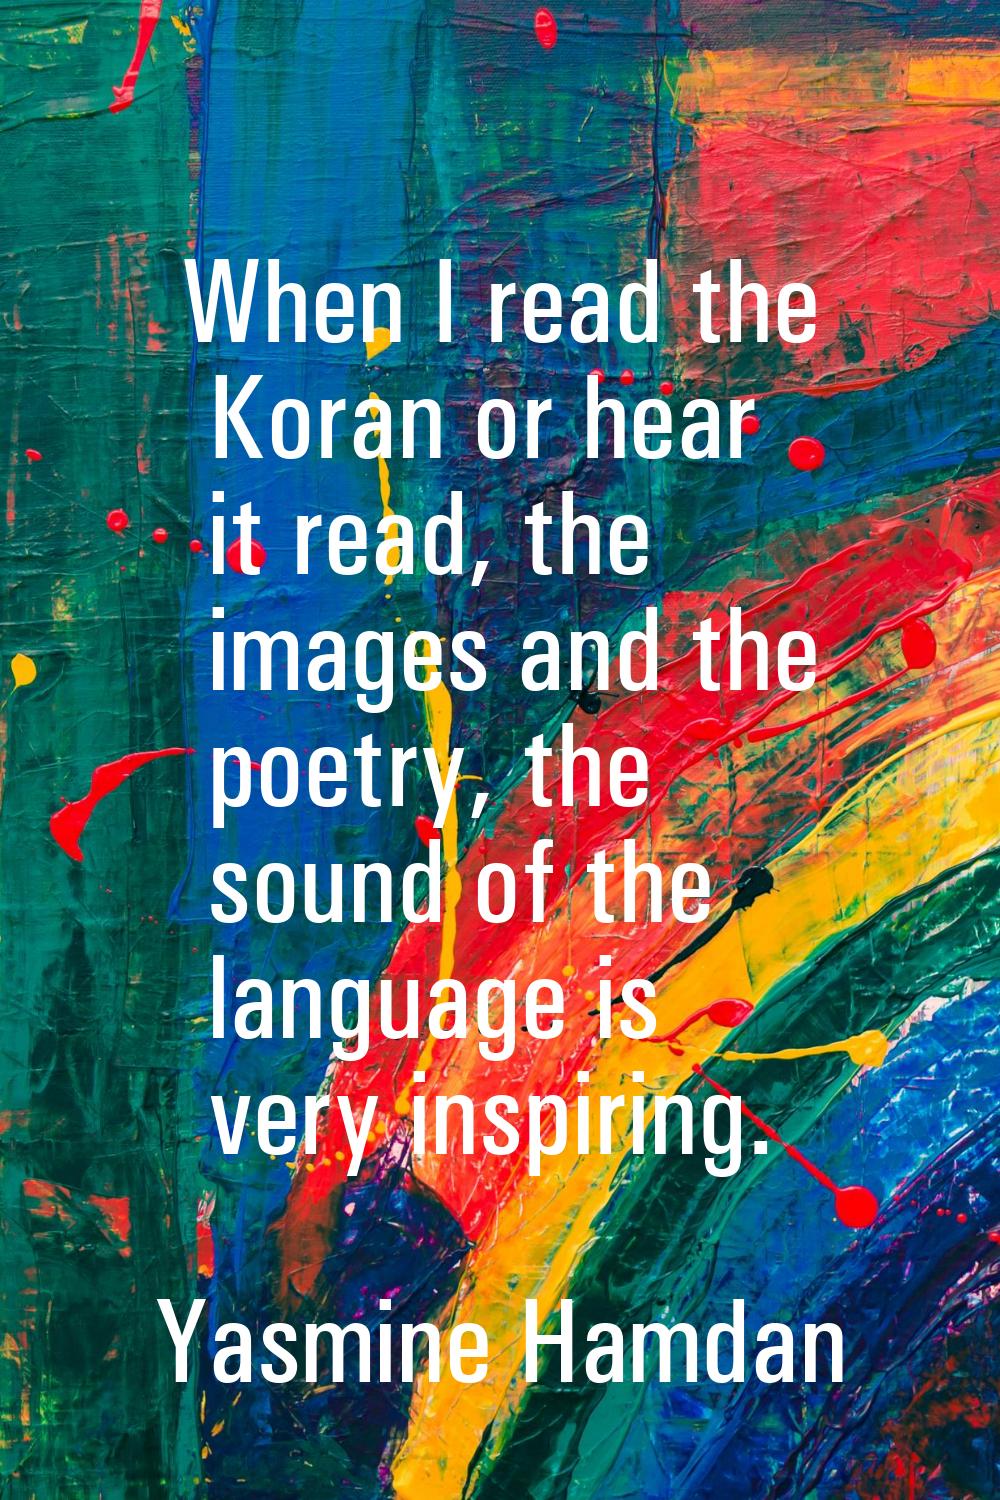 When I read the Koran or hear it read, the images and the poetry, the sound of the language is very